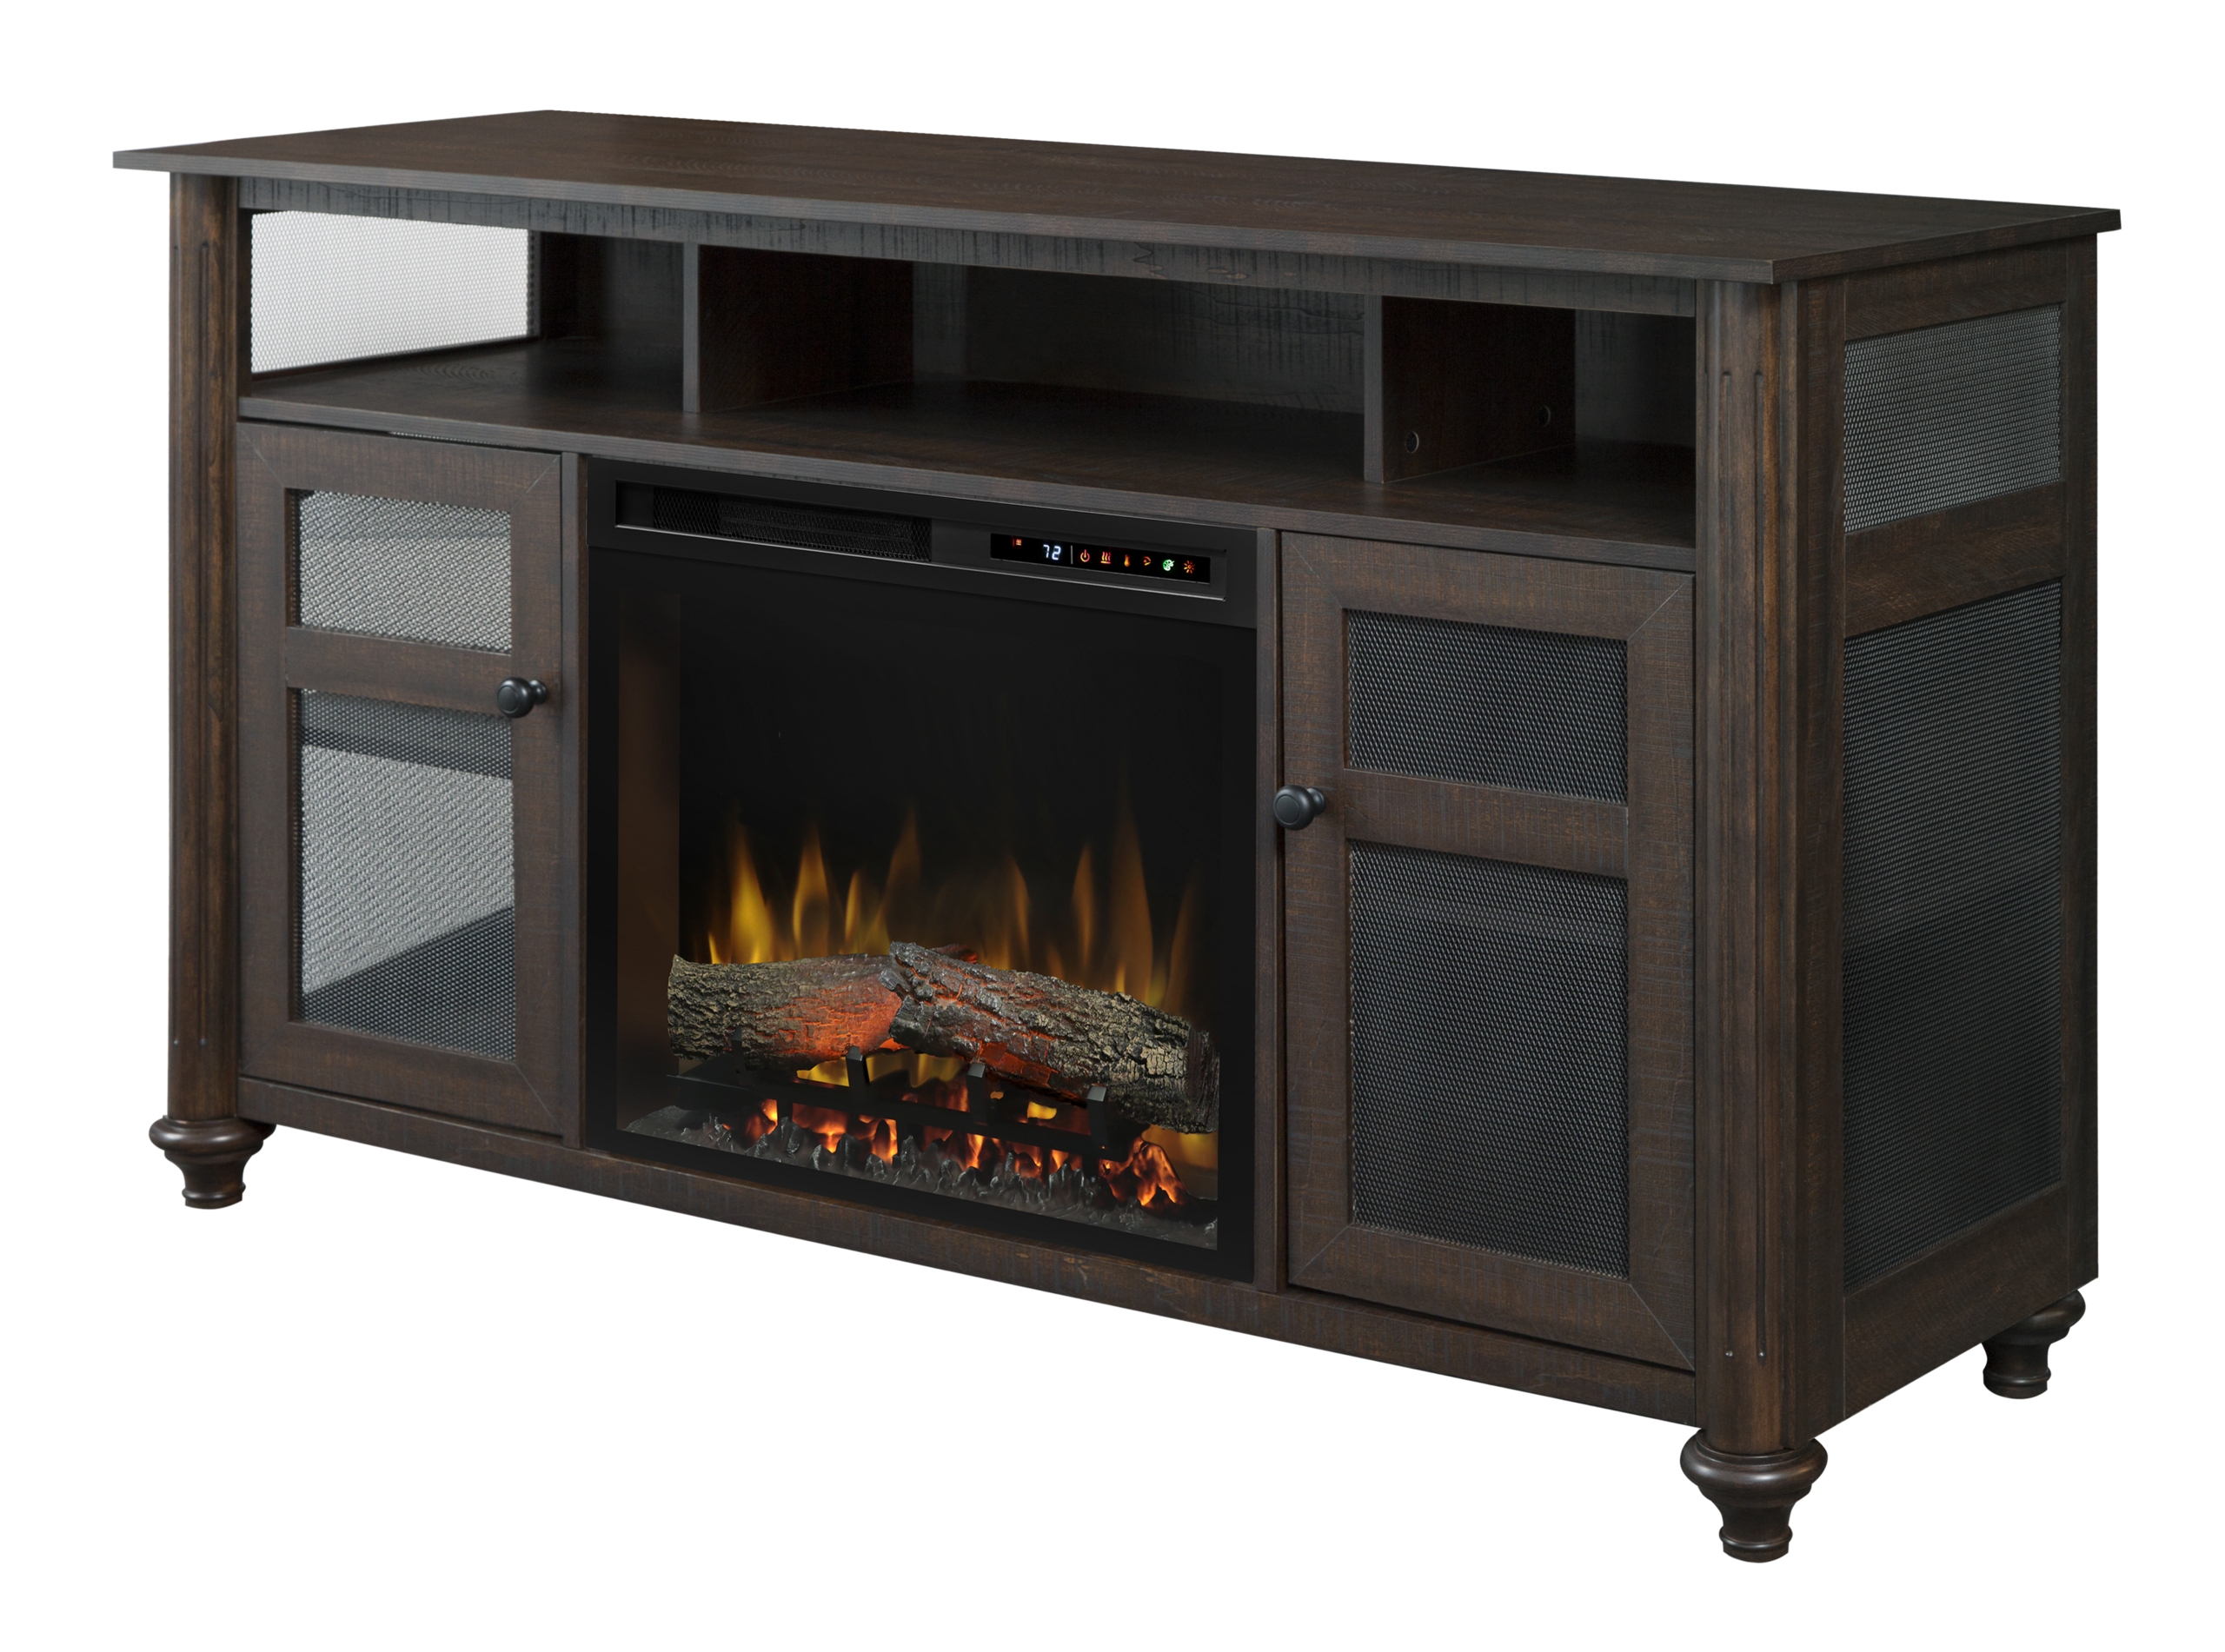 ConCourse TV Stand for TVs up to 60" with Fireplace Included